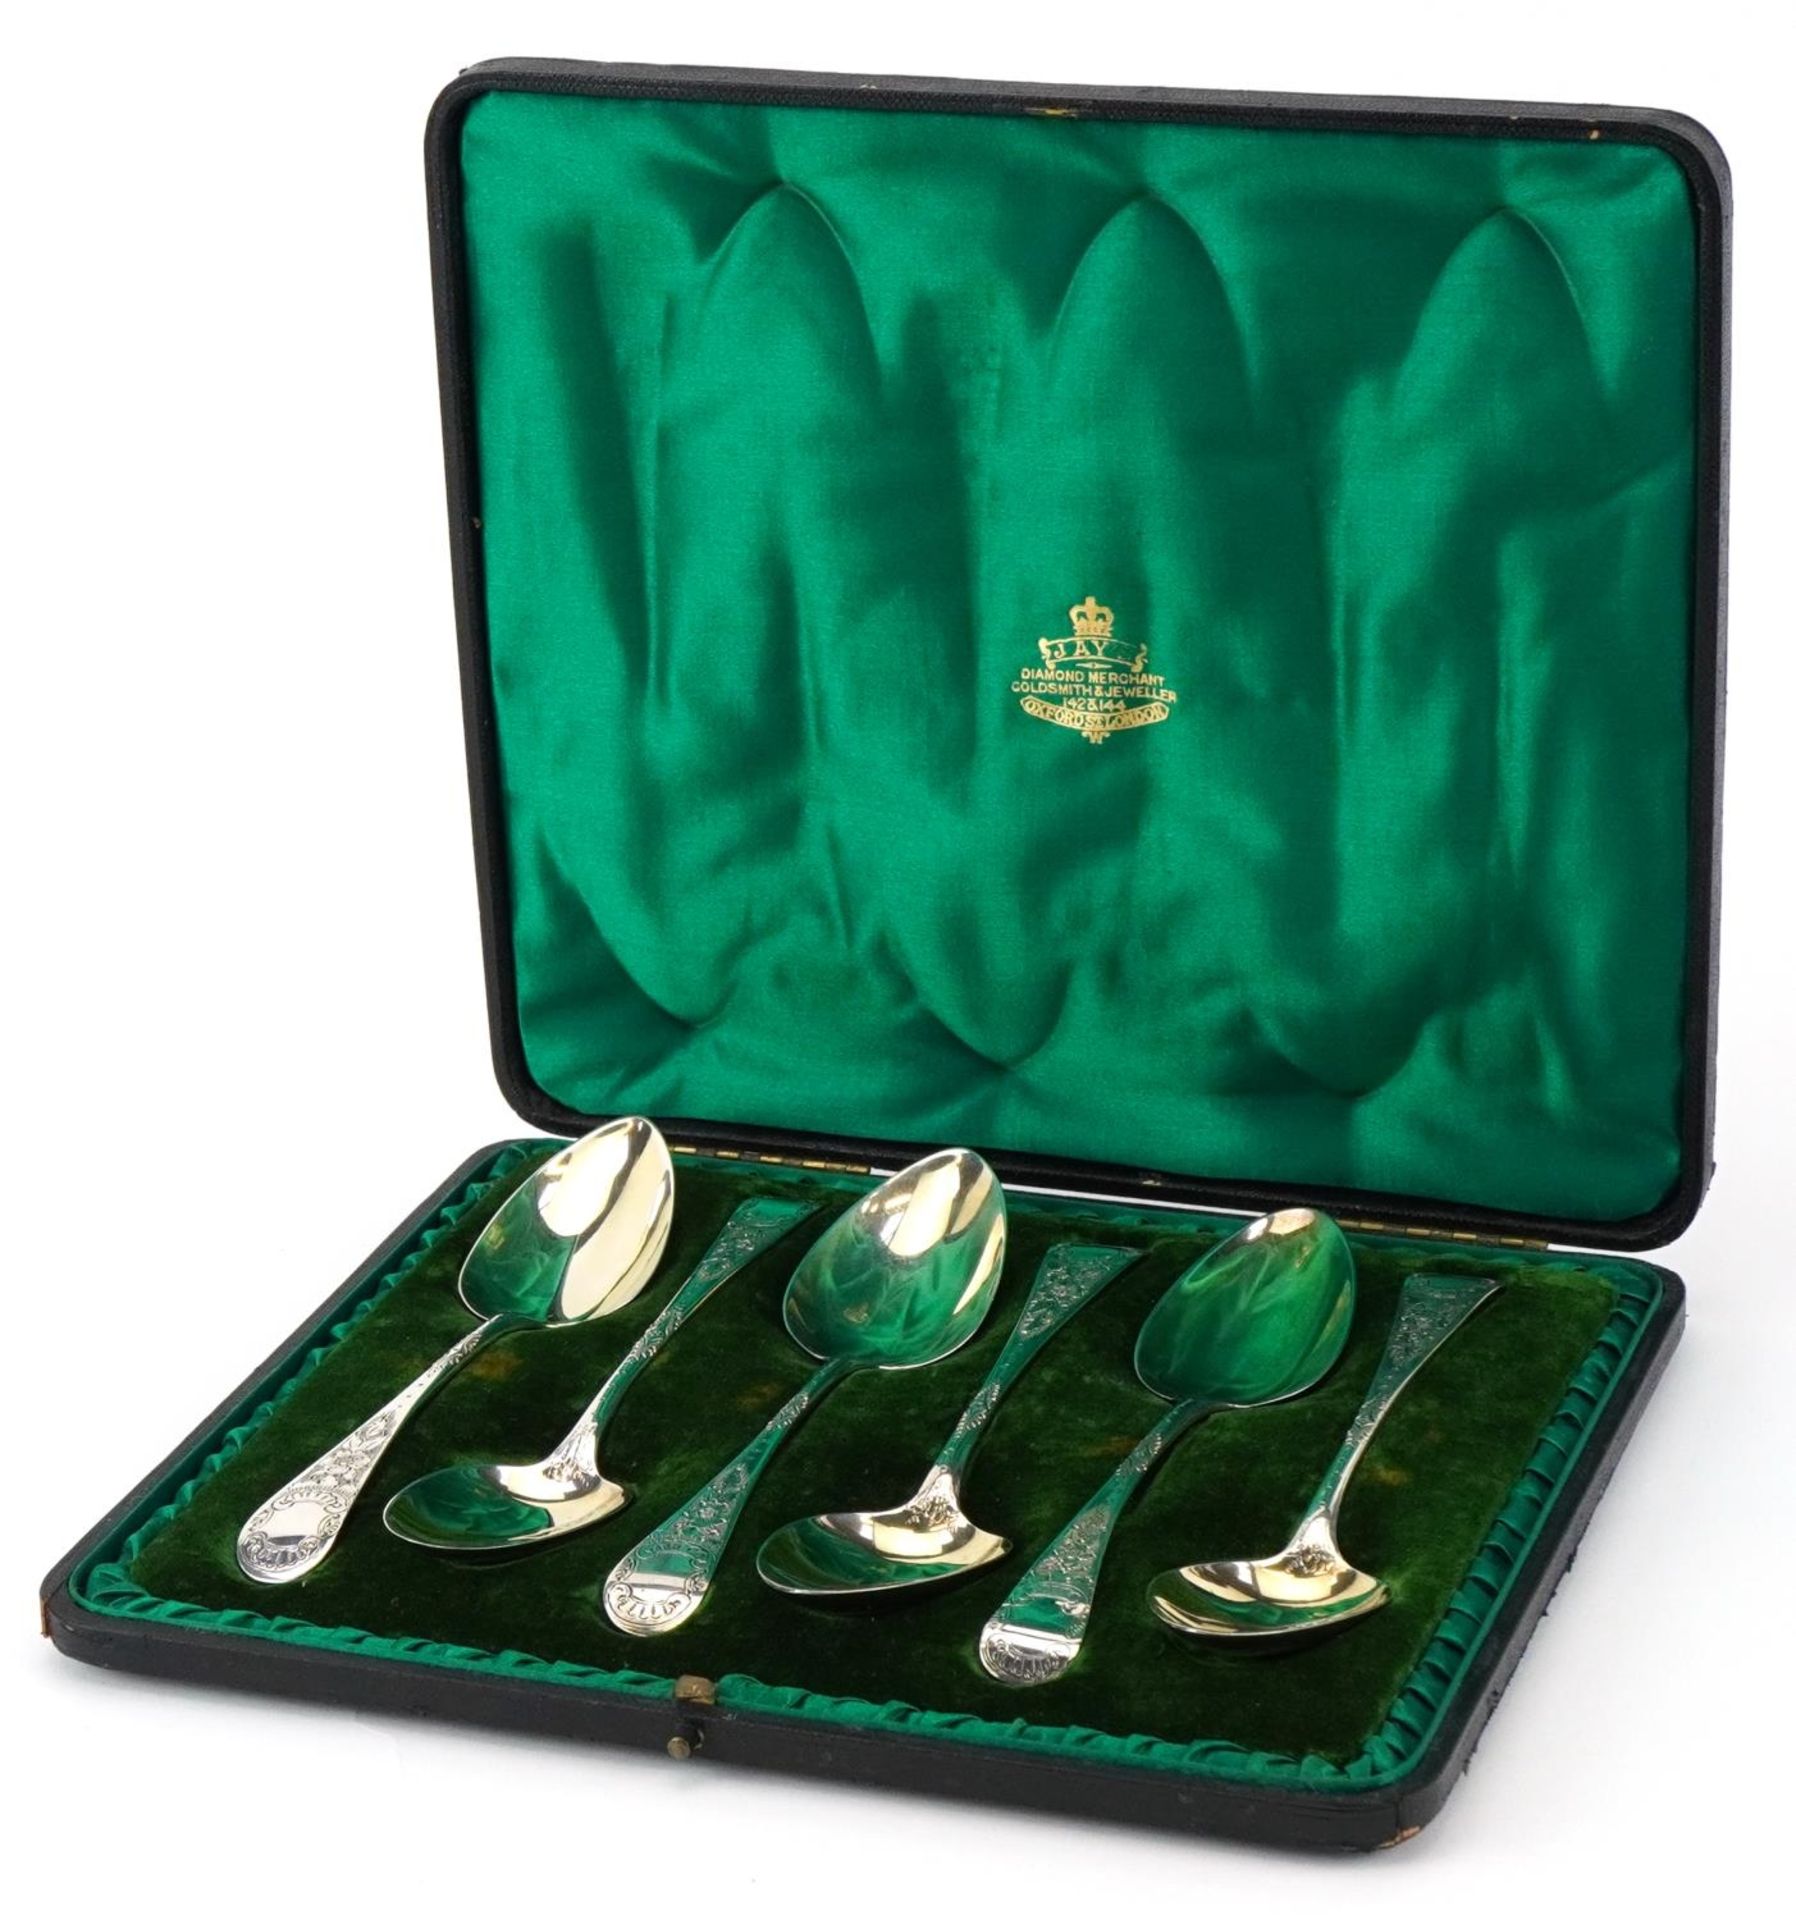 Matched set of six George III silver spoons housed in a Jays Oxford Street London jeweller's case,